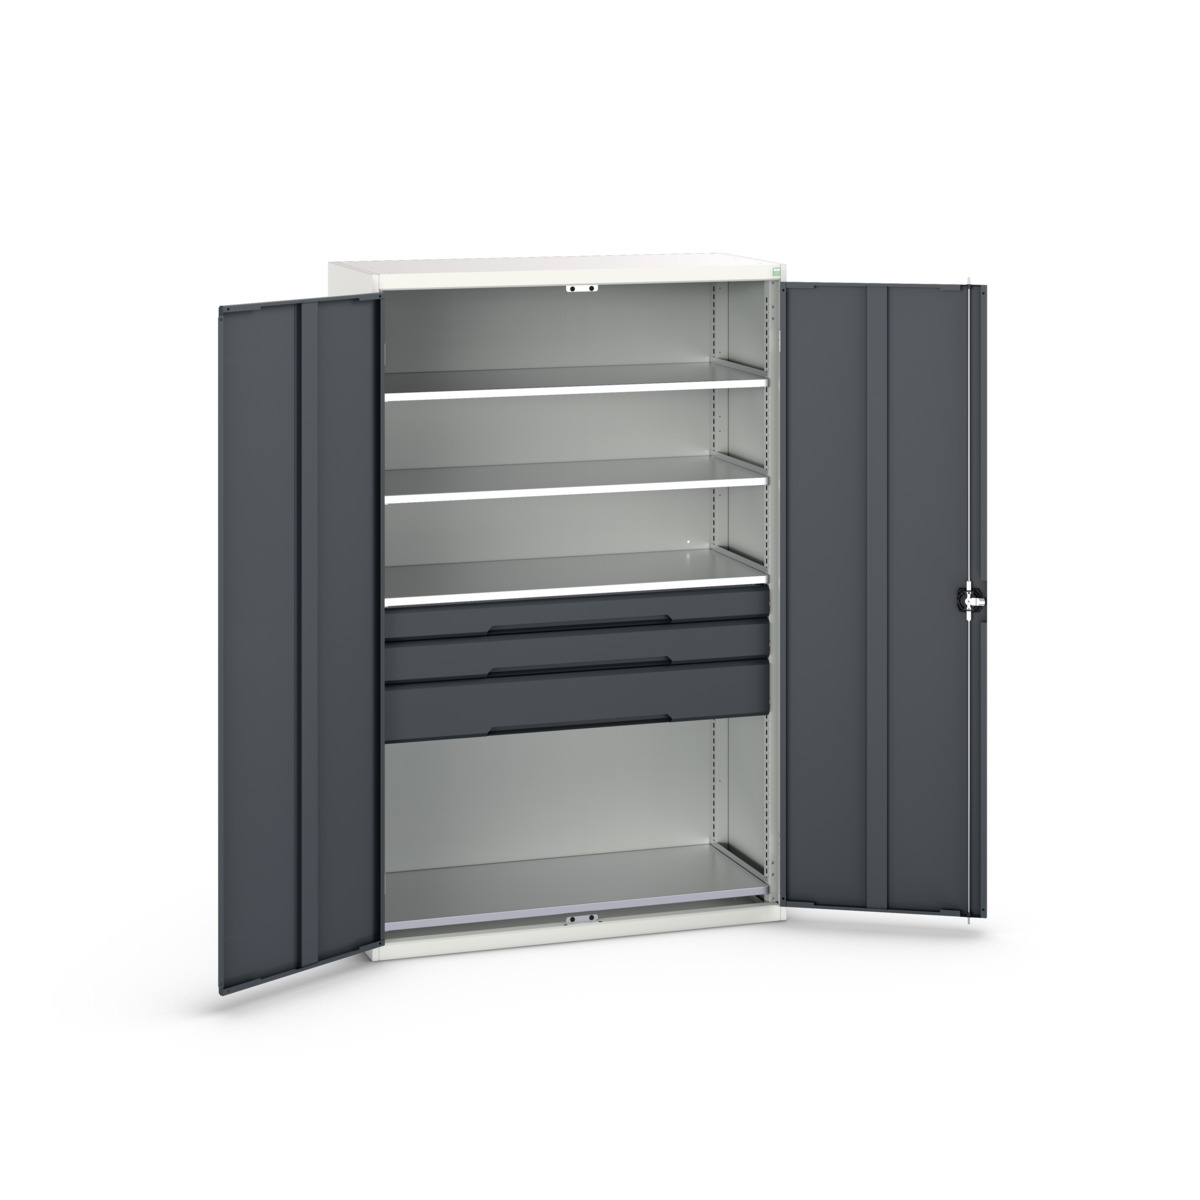 16926655.19 - verso kitted cupboard